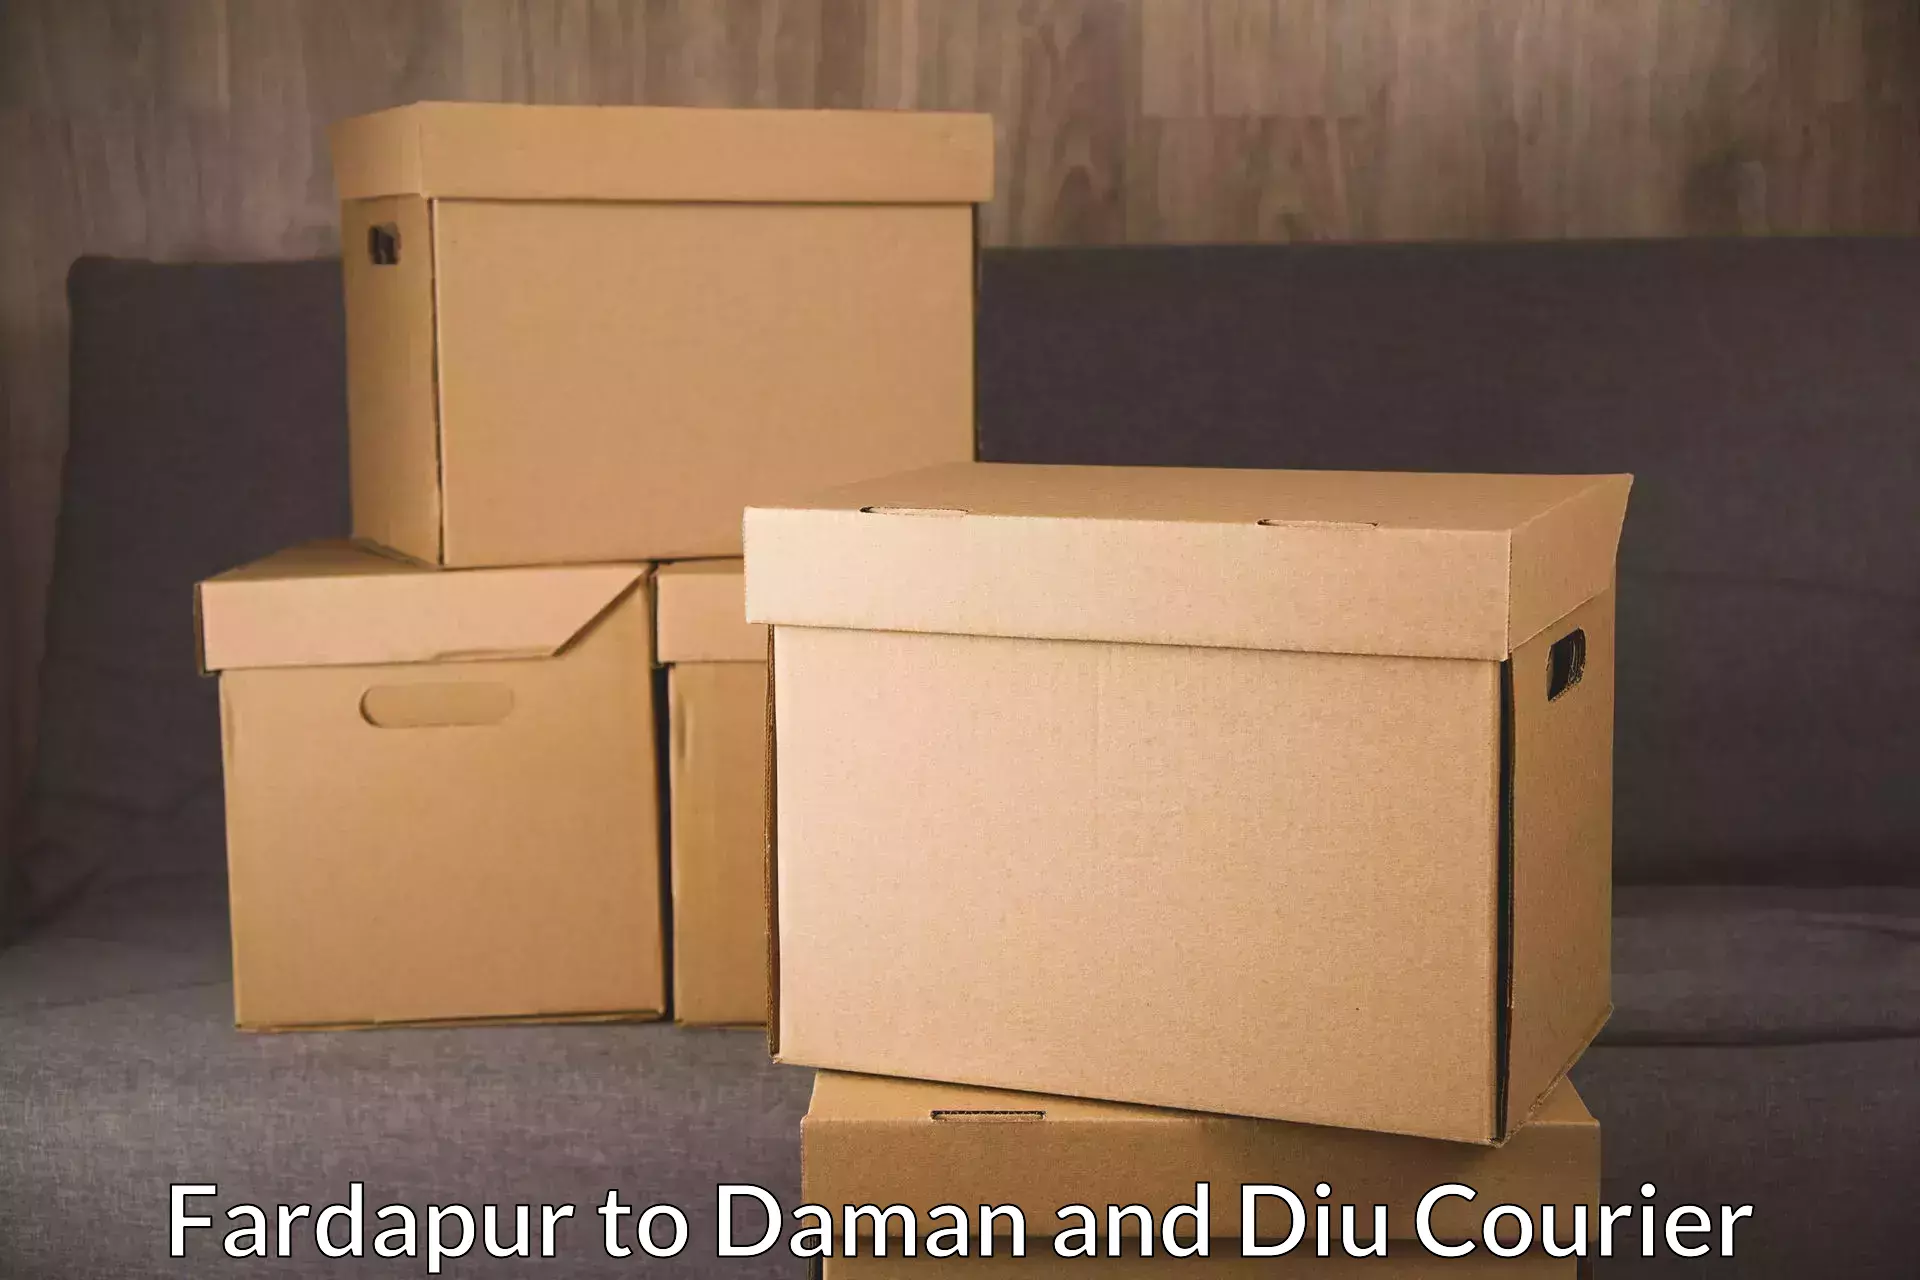 Courier service innovation Fardapur to Diu